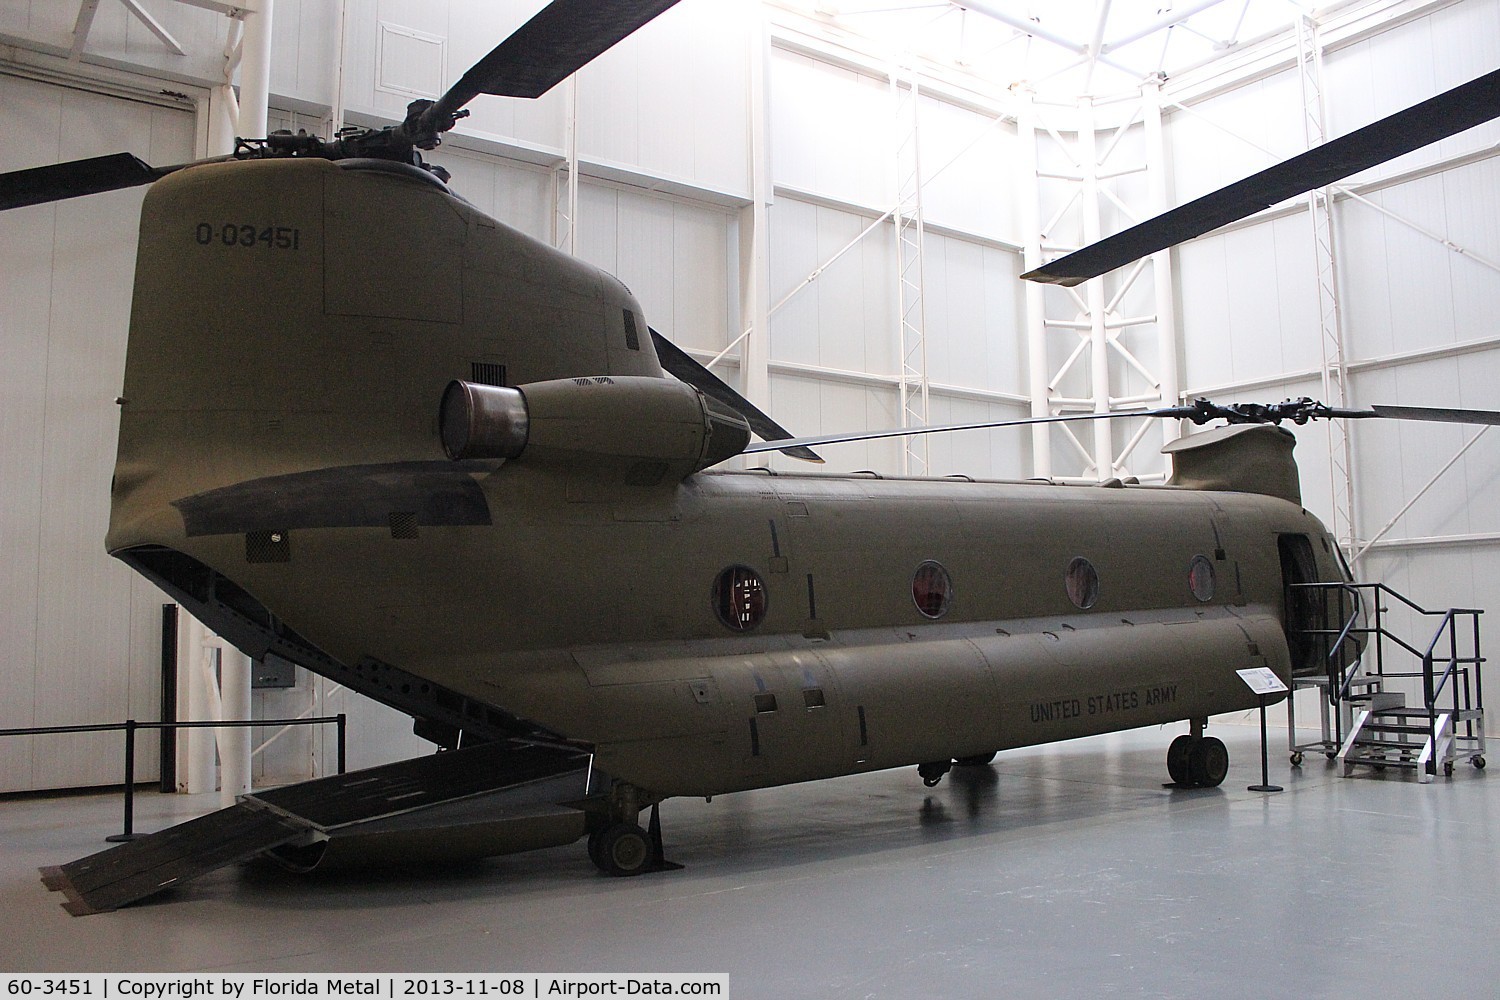 60-3451, 1961 Boeing Vertol CH-47A Chinook C/N B.010, CH-47A Chinook at Ft. Rucker